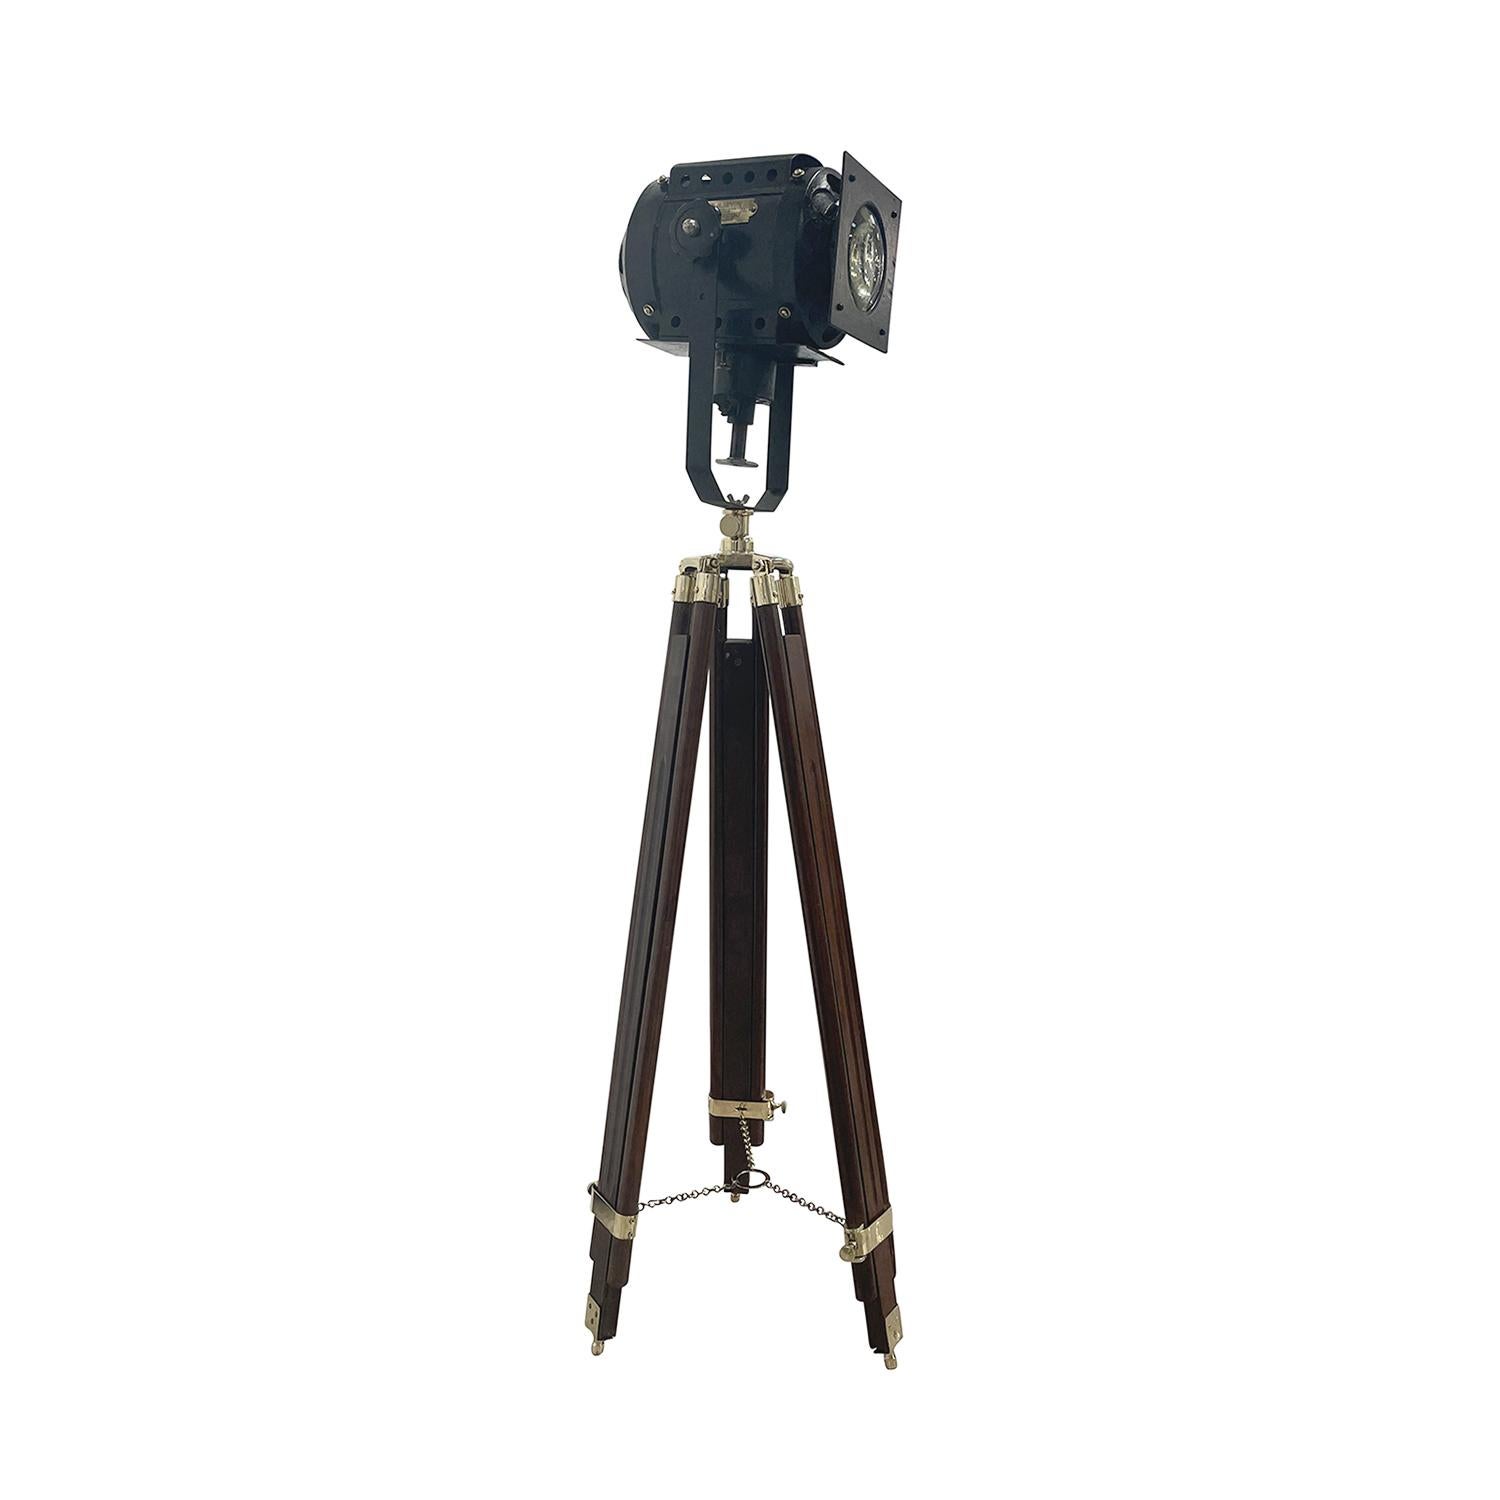 A grey-black, vintage Mid-Century Modern French spotlight made of handcrafted lacquered iron, designed and produced by Clémançon in good condition. The detailed Parisian cinema floor studio lamp is featuring a one light socket, consisting its